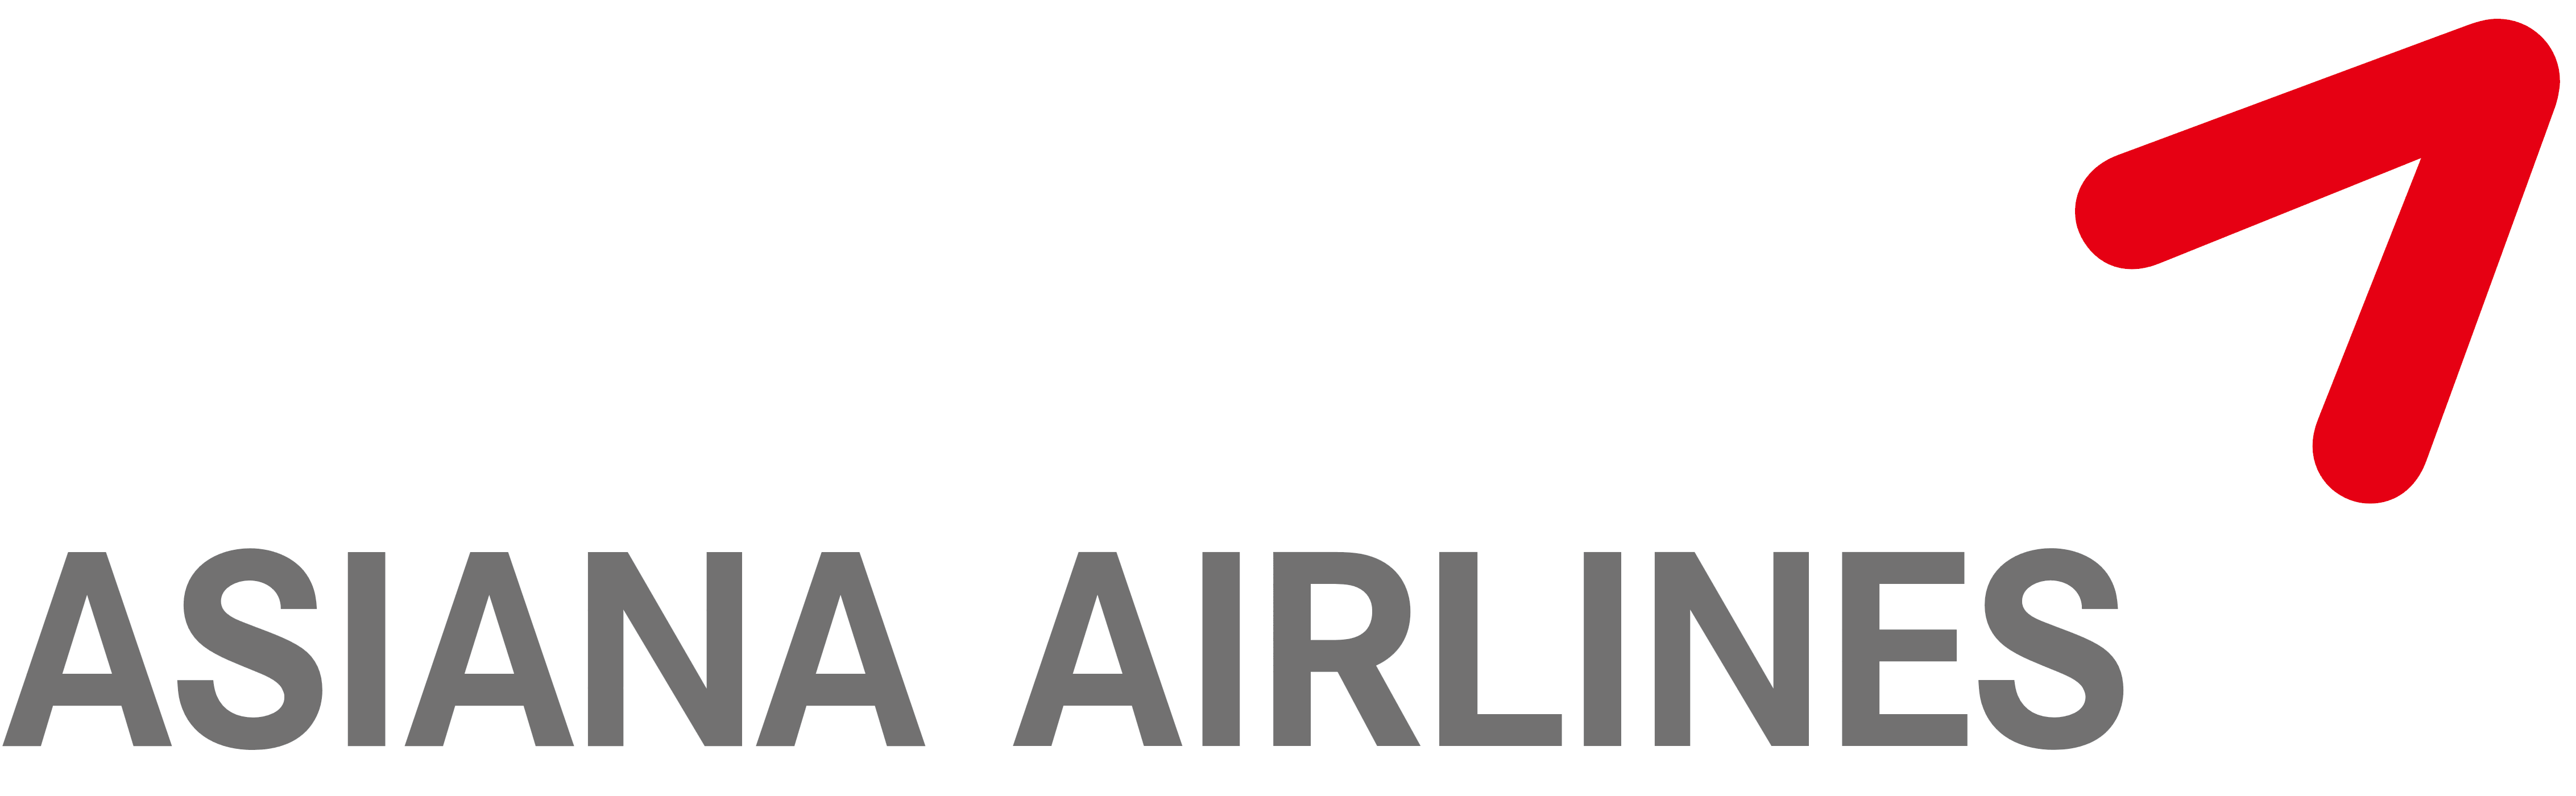 Asiana Airlines Logo, Logotipo - Asiana Airlines, Transparent background PNG HD thumbnail